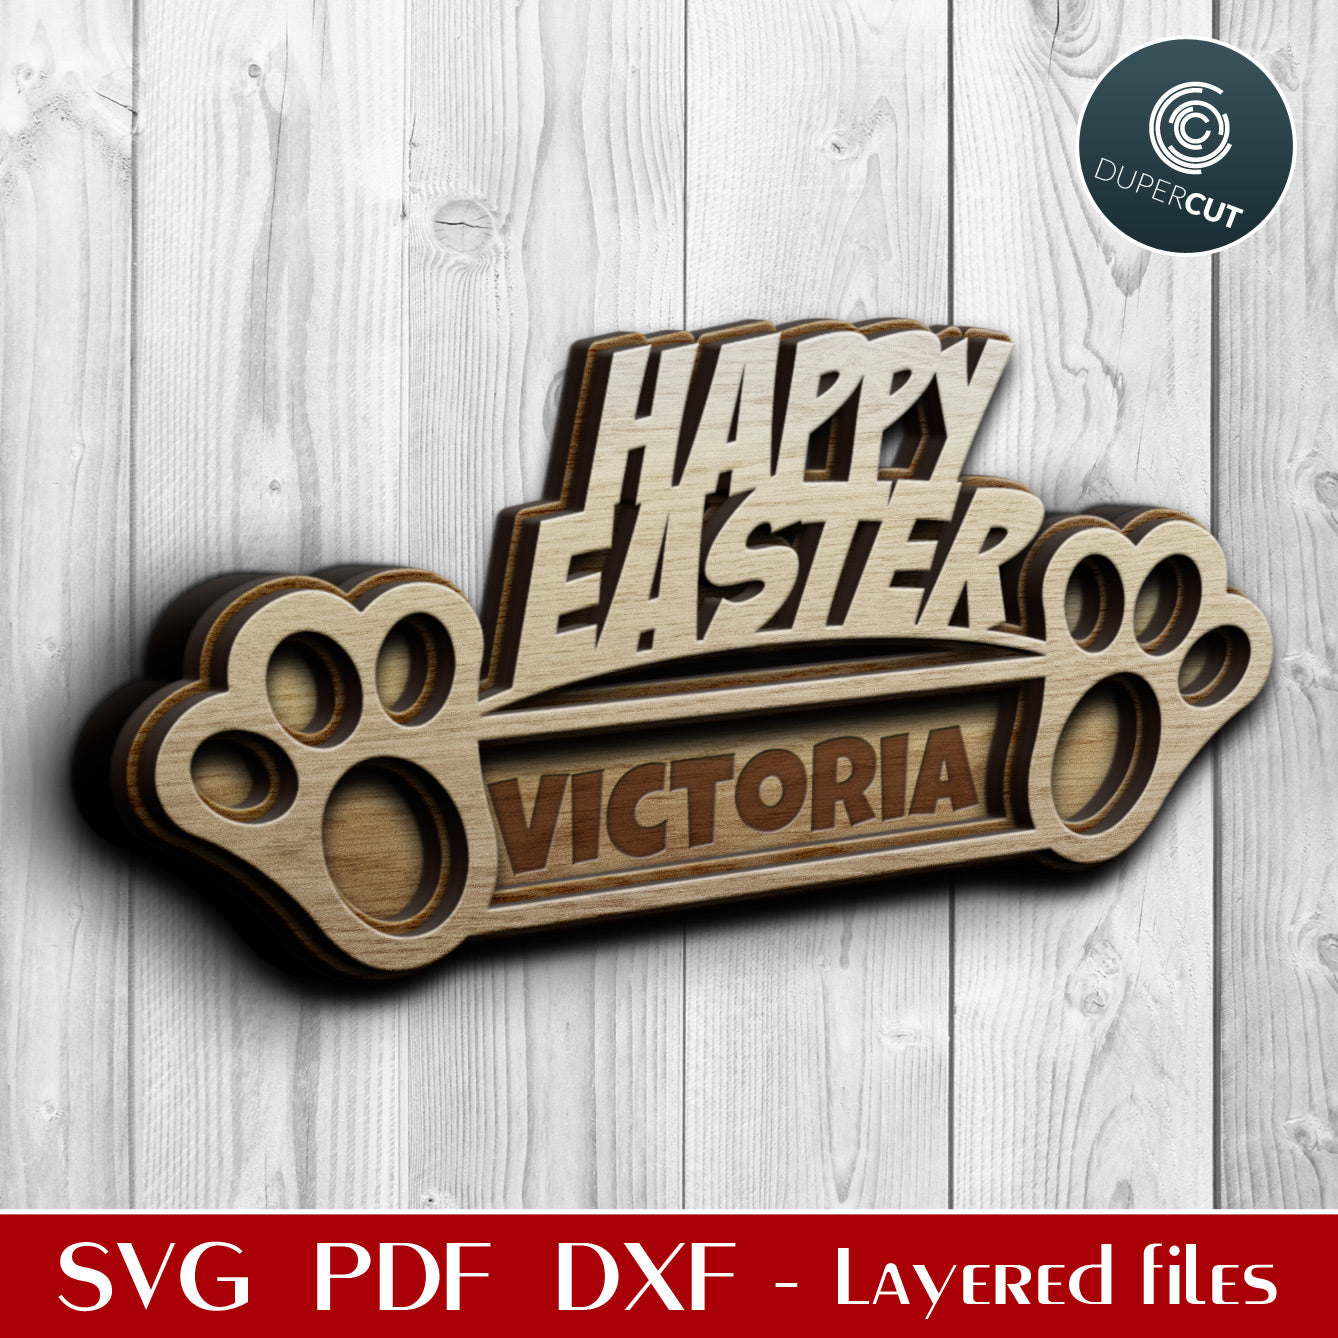 Happy Easter - personalized name tags - SVG PDF DXF vector files for laser cutting with Glowforge, Cricut, Silhouette Cameo, CNC plasma machines